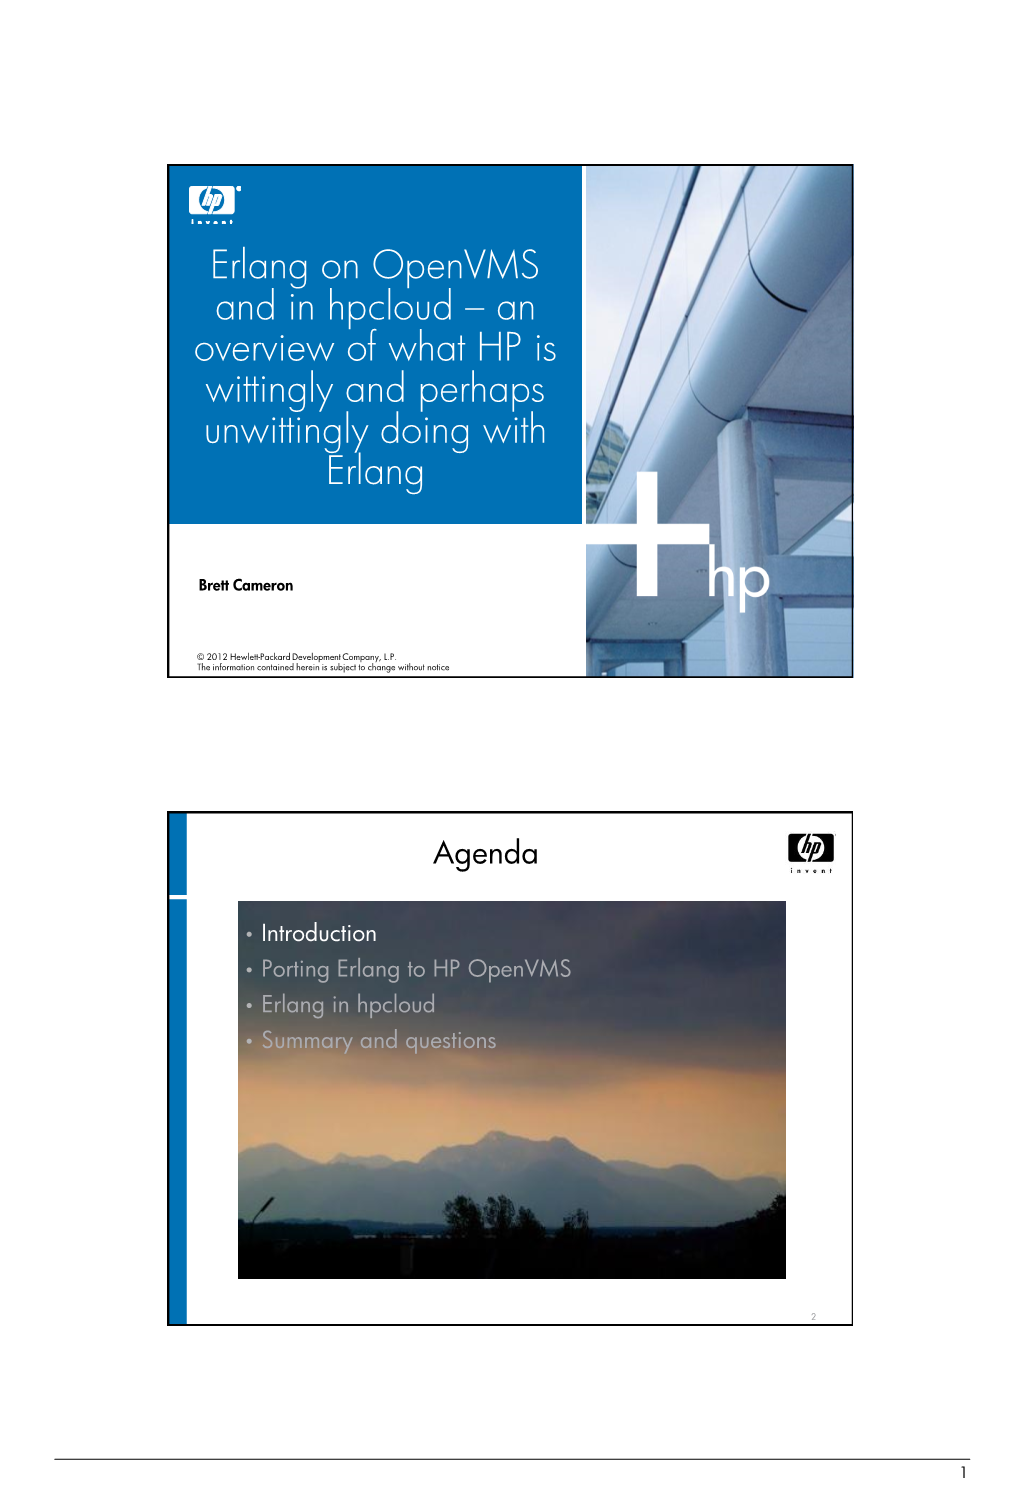 Erlang on Openvms and in Hpcloud – an Overview of What HP Is Wittingly and Perhaps Unwittingly Doing with Erlang